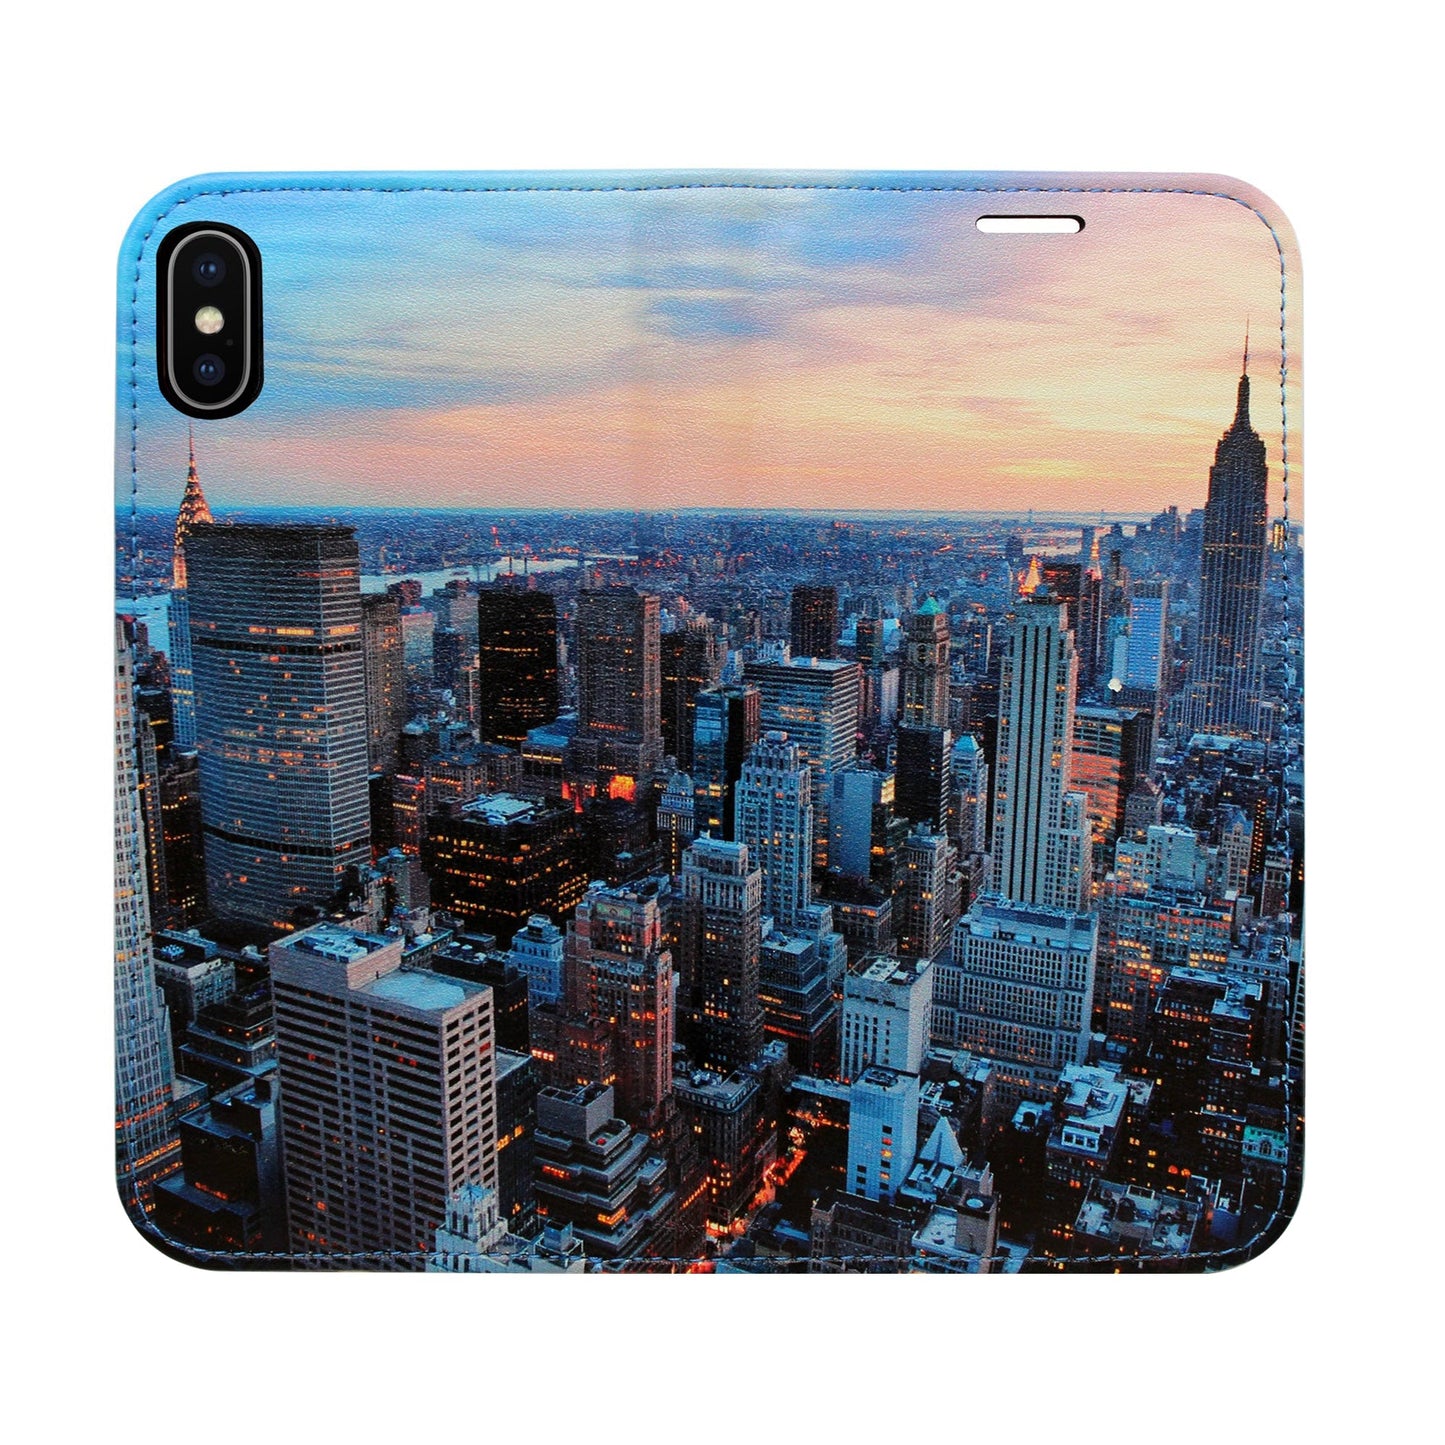 New York City Panorama Case for iPhone X/XS